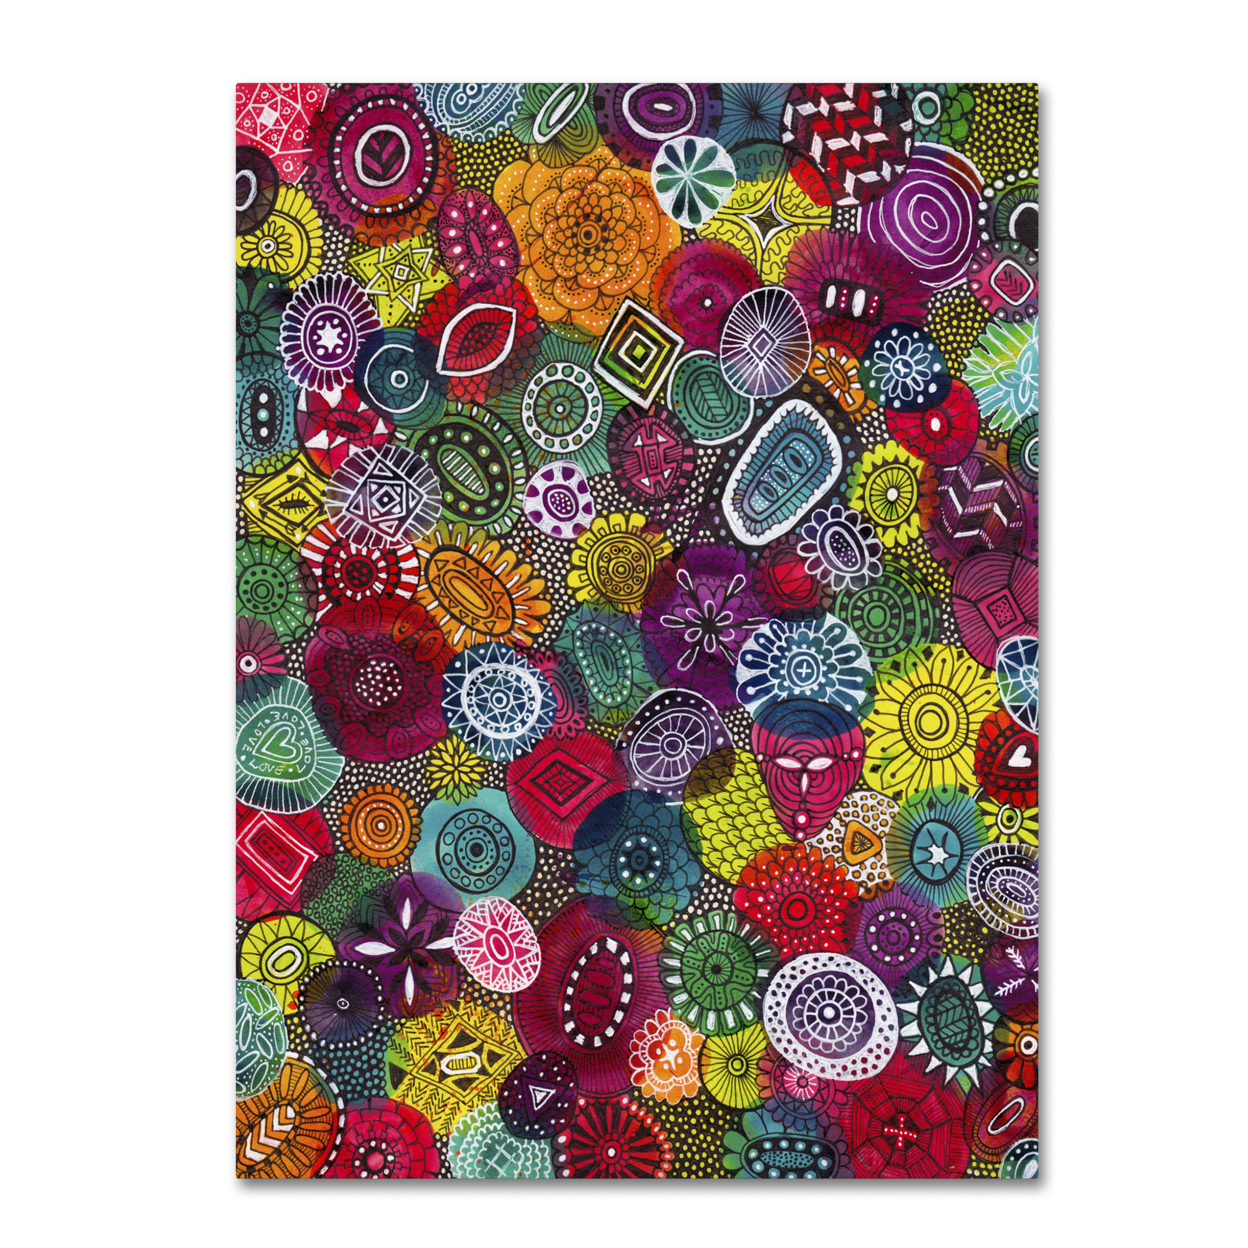 Hello Angel 'Autumn Jewels' Canvas Wall Art 35 X 47 Inches